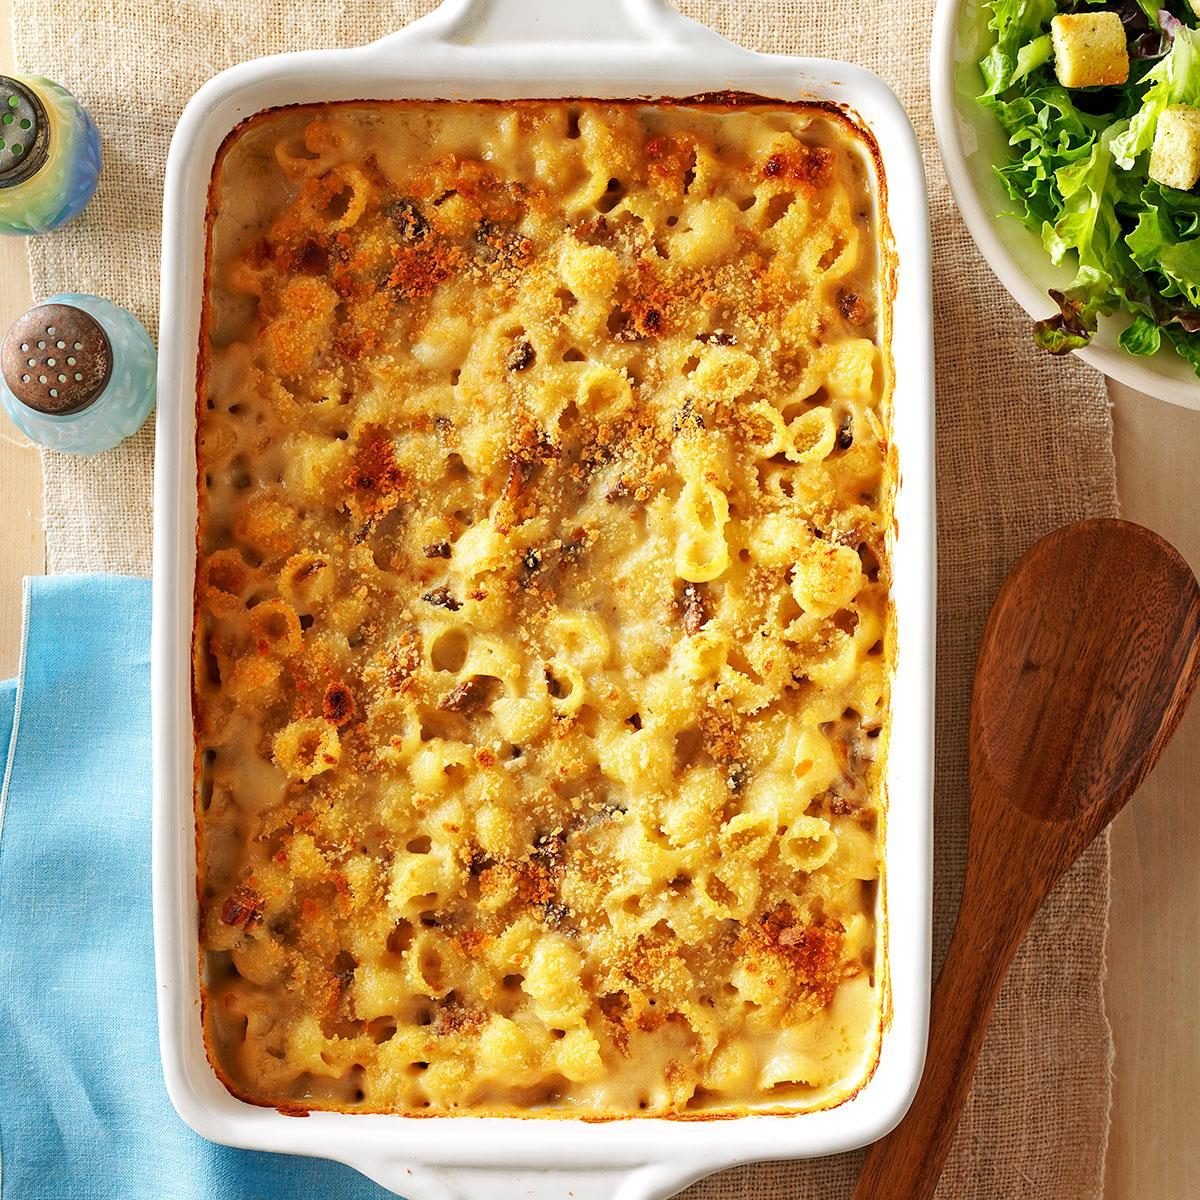 https://www.tasteofhome.com/wp-content/uploads/2018/01/Porcini-Mac-Cheese_exps168216_CW132791B04_23_5bC_RMS-11.jpg?fit=700%2C1024